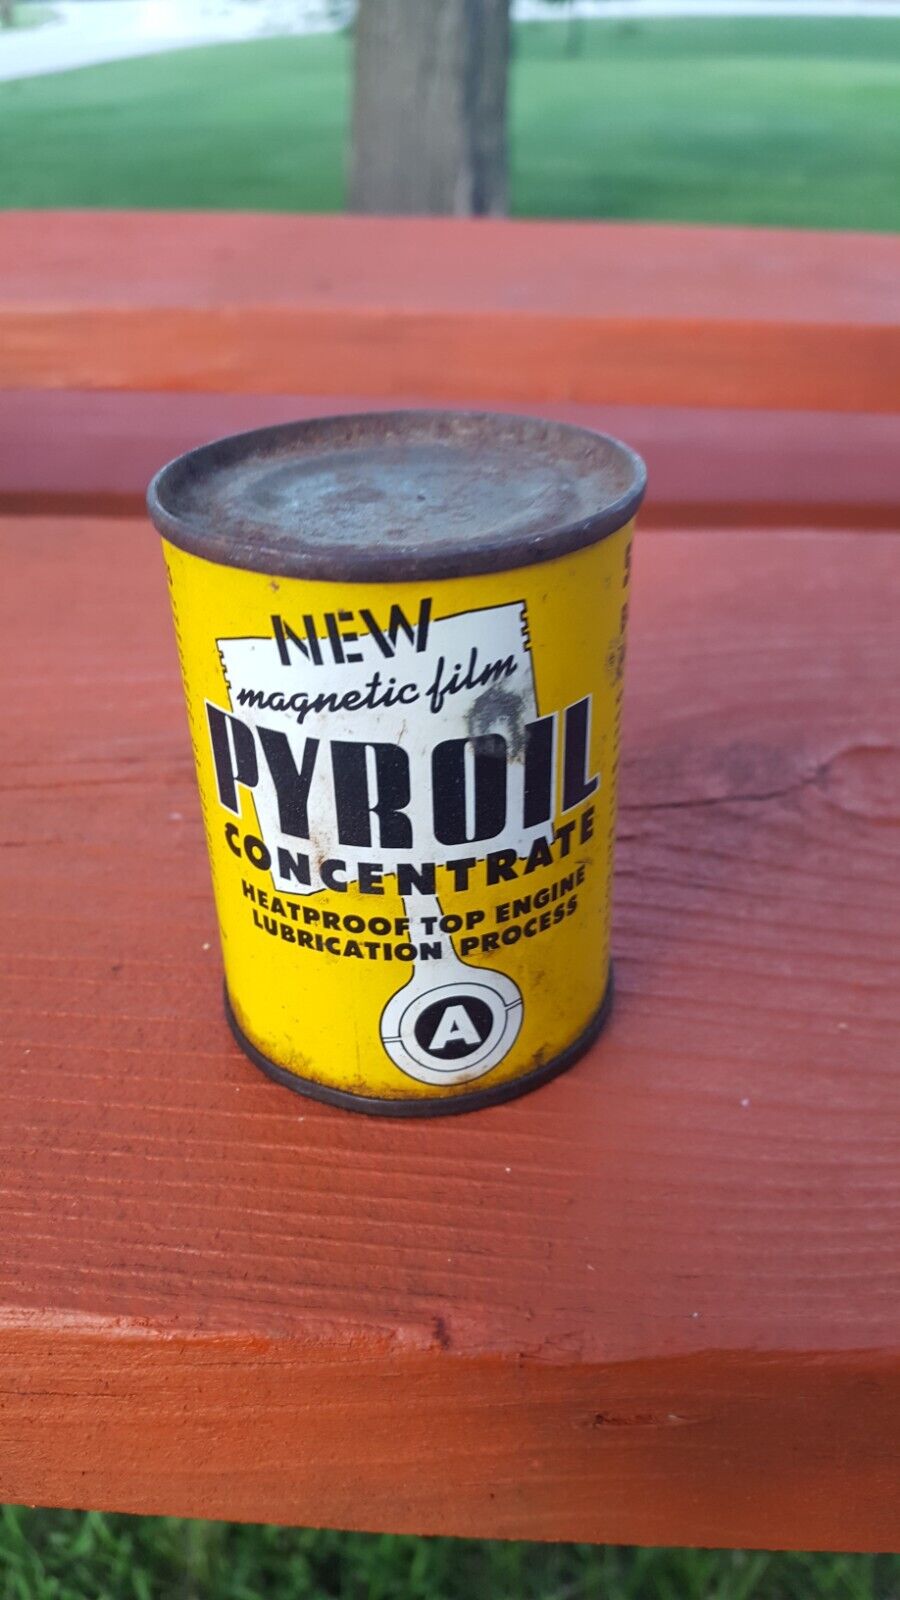 Vintage NOS Pyroil A Concentrate 4oz Full in Sealed Can